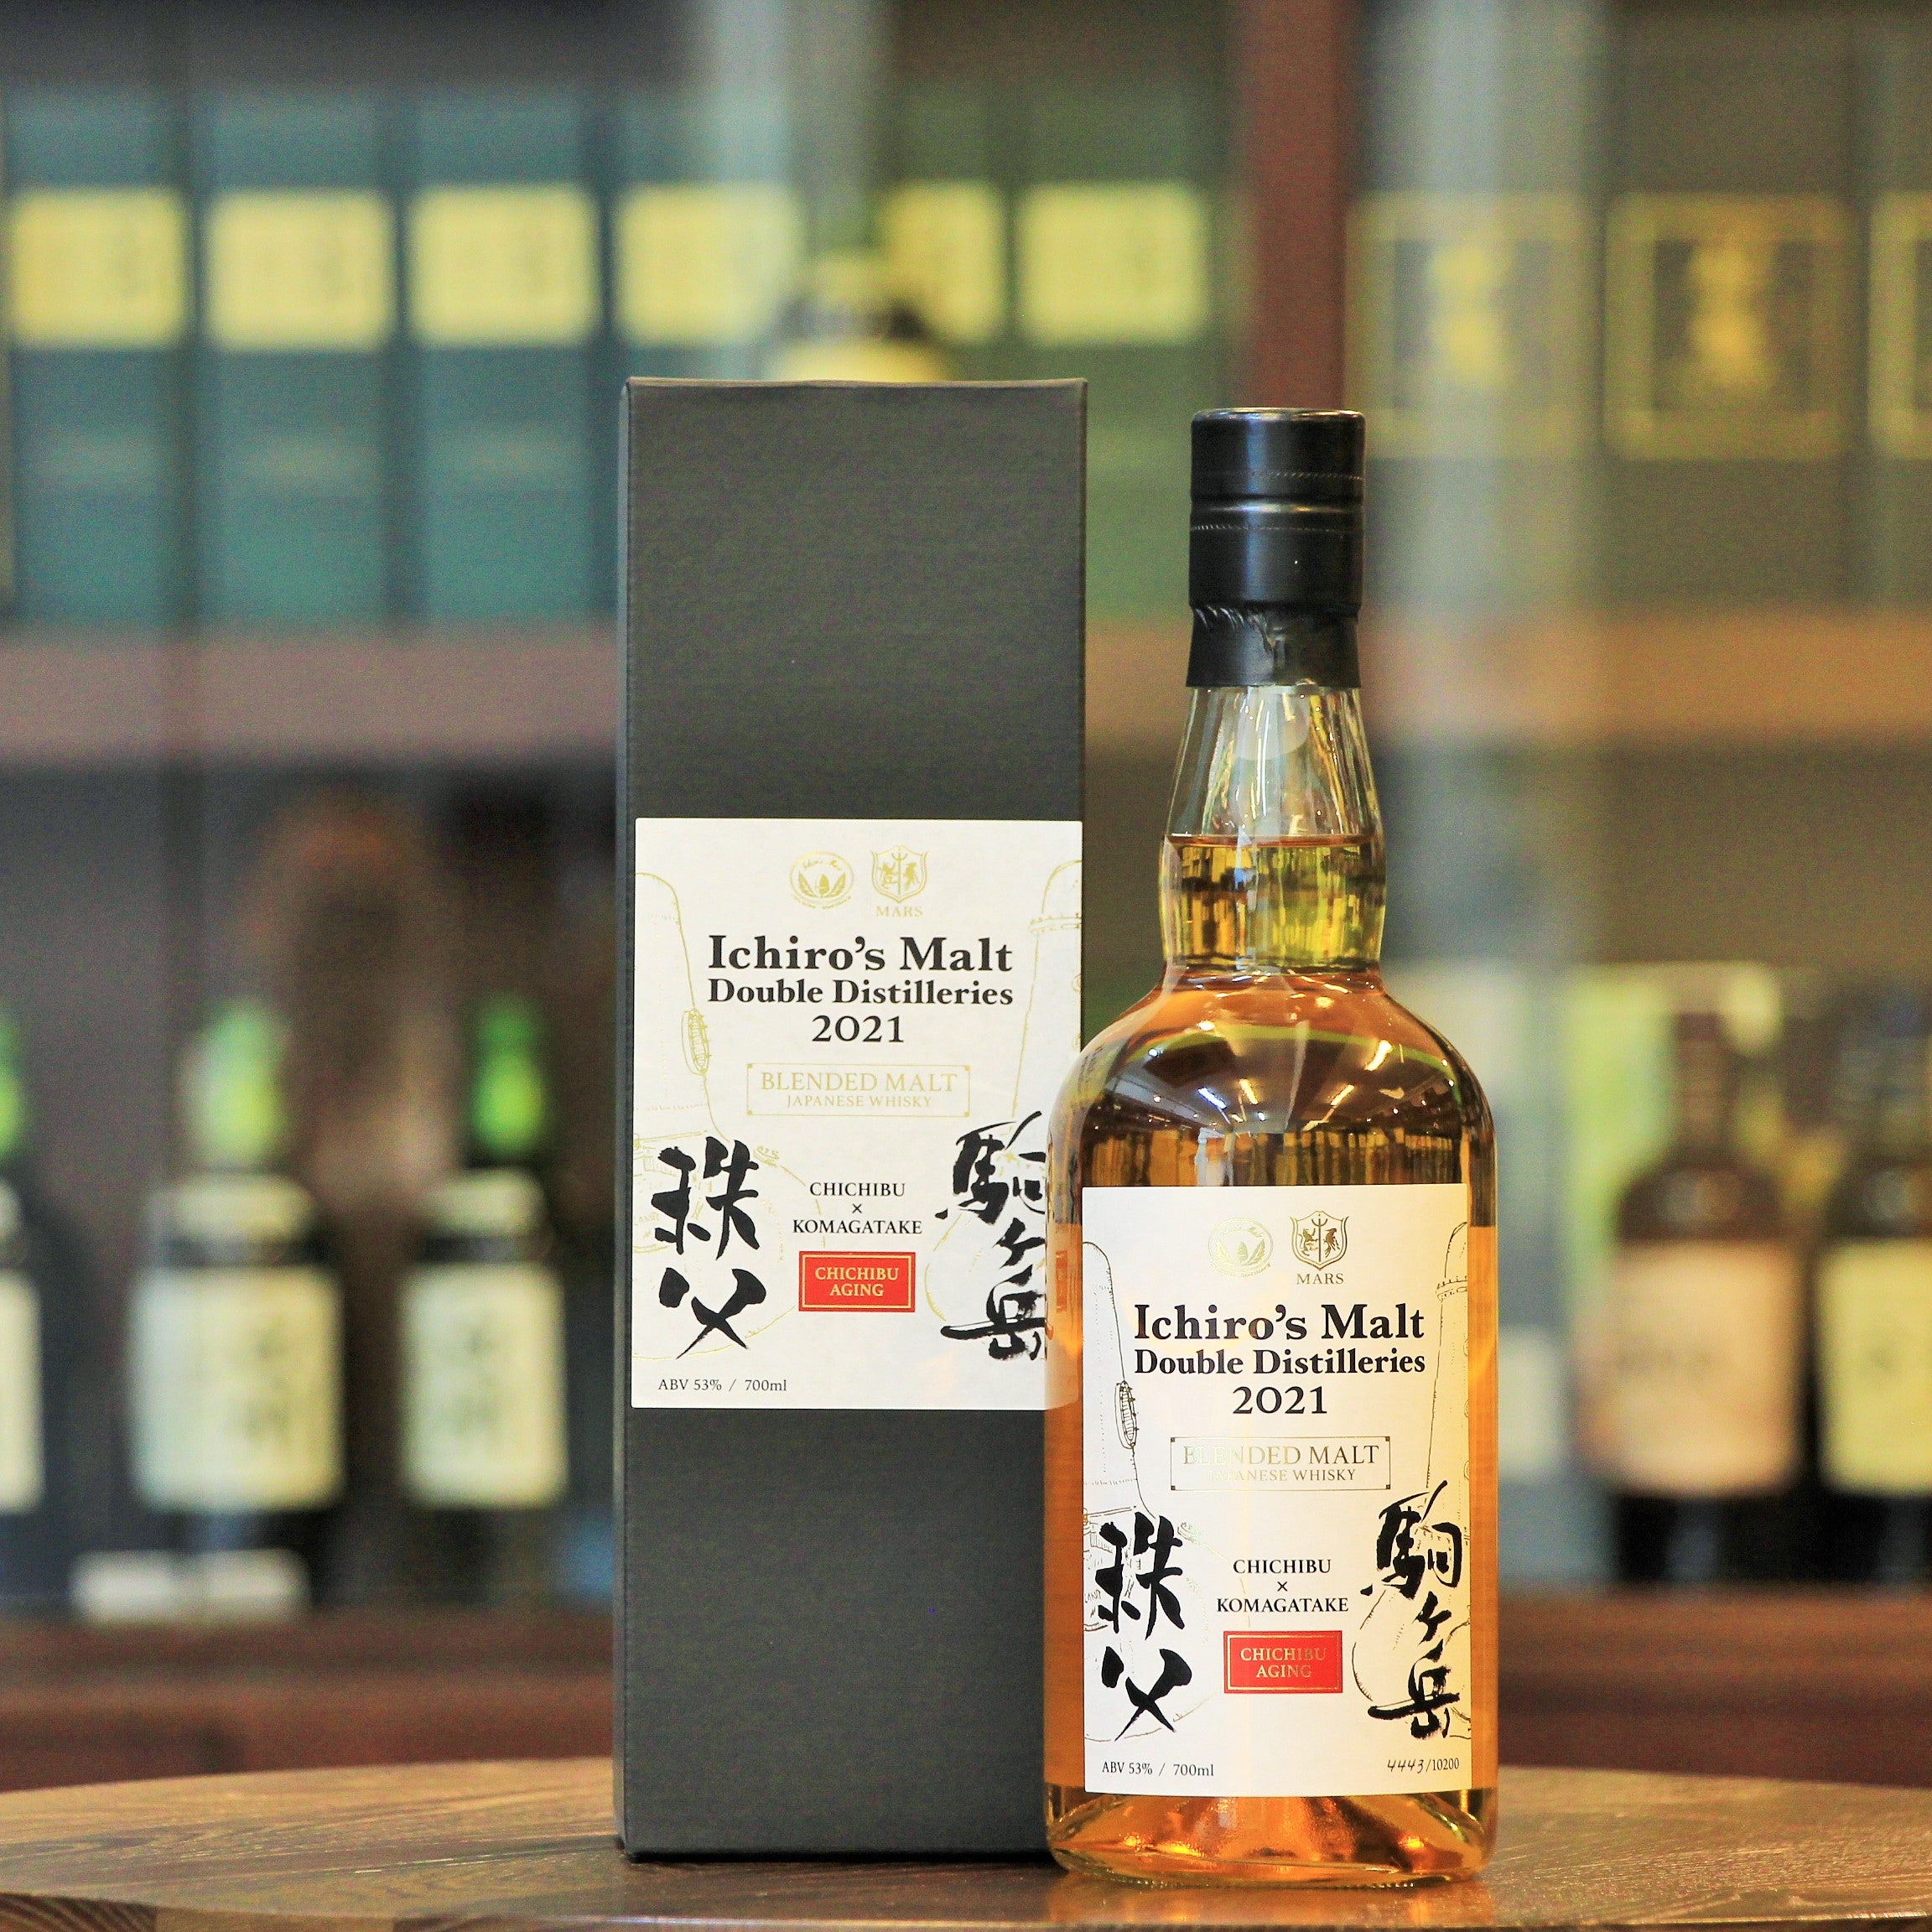 This is a special bottling released by the Chichibu Distillery and is a vatting of malt from two distilleries, "Chichibu" and "Komagatake", which has been matured at the Chichibu Distillery in a variety of Bourbon Barrel, American White Oak and Sherry Oak for more than 5 years. In 2015, Venture Whisky (Chichibu) Distillery and Mars Shinshu Distillery began exchanging their new make spirit, which was subsequently matured in their respective locations. 10,200 bottles were released.